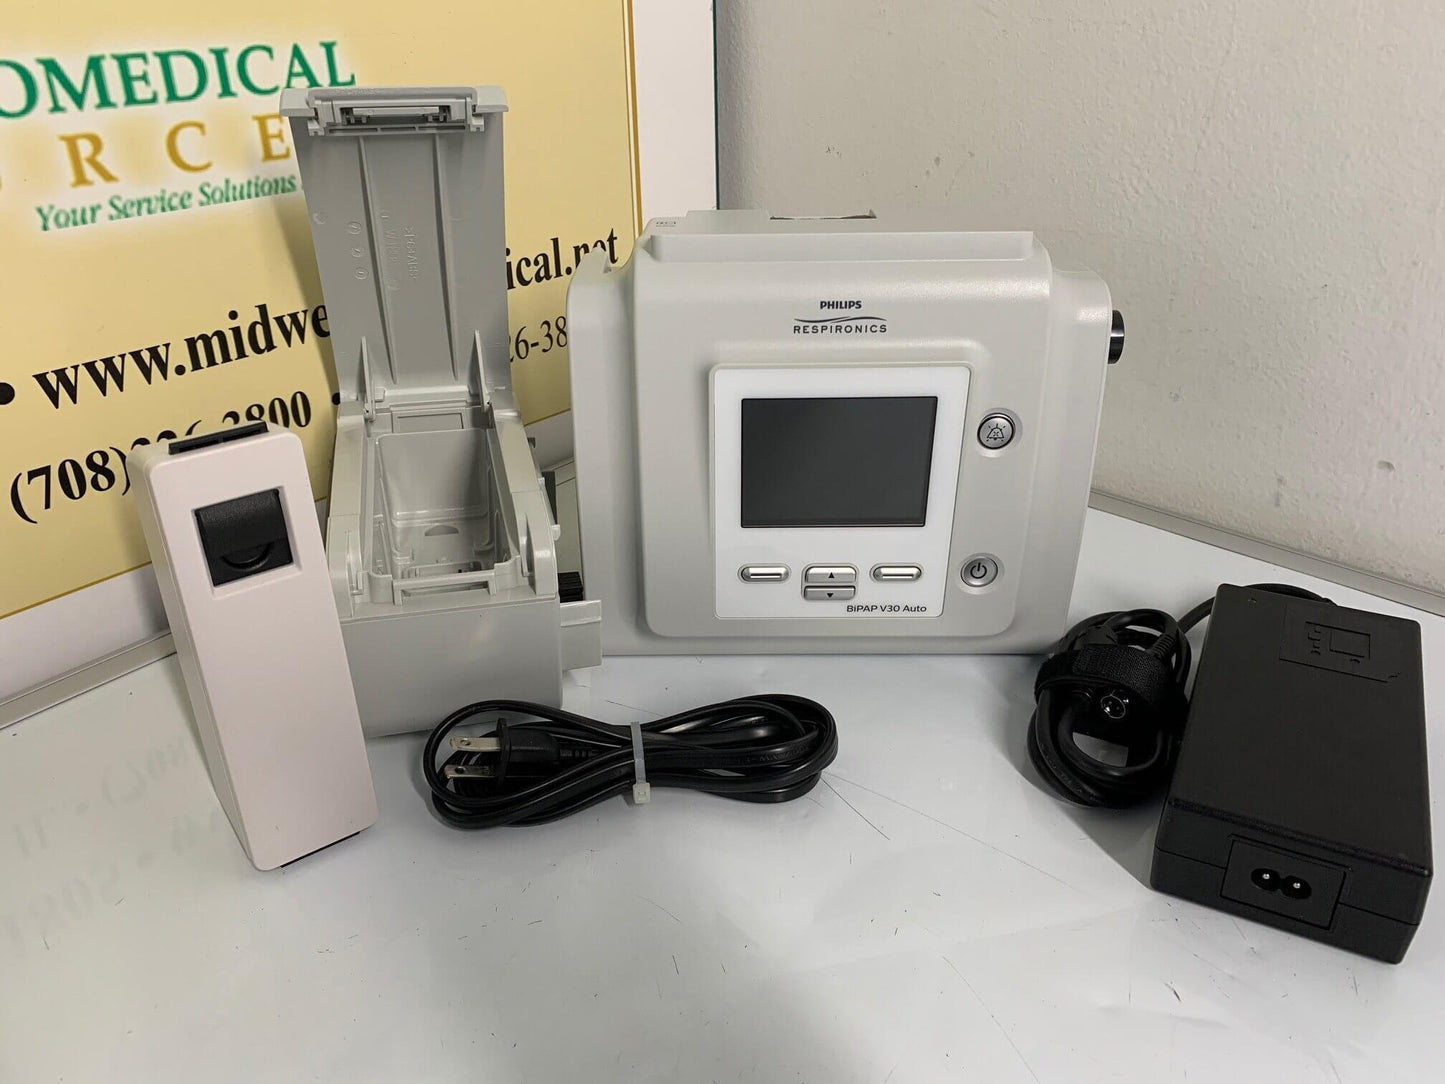 REFURBISHED Philips Respironics BiPAP V30 Auto 1111155 with Warranty & Free Shipping - MBR Medicals